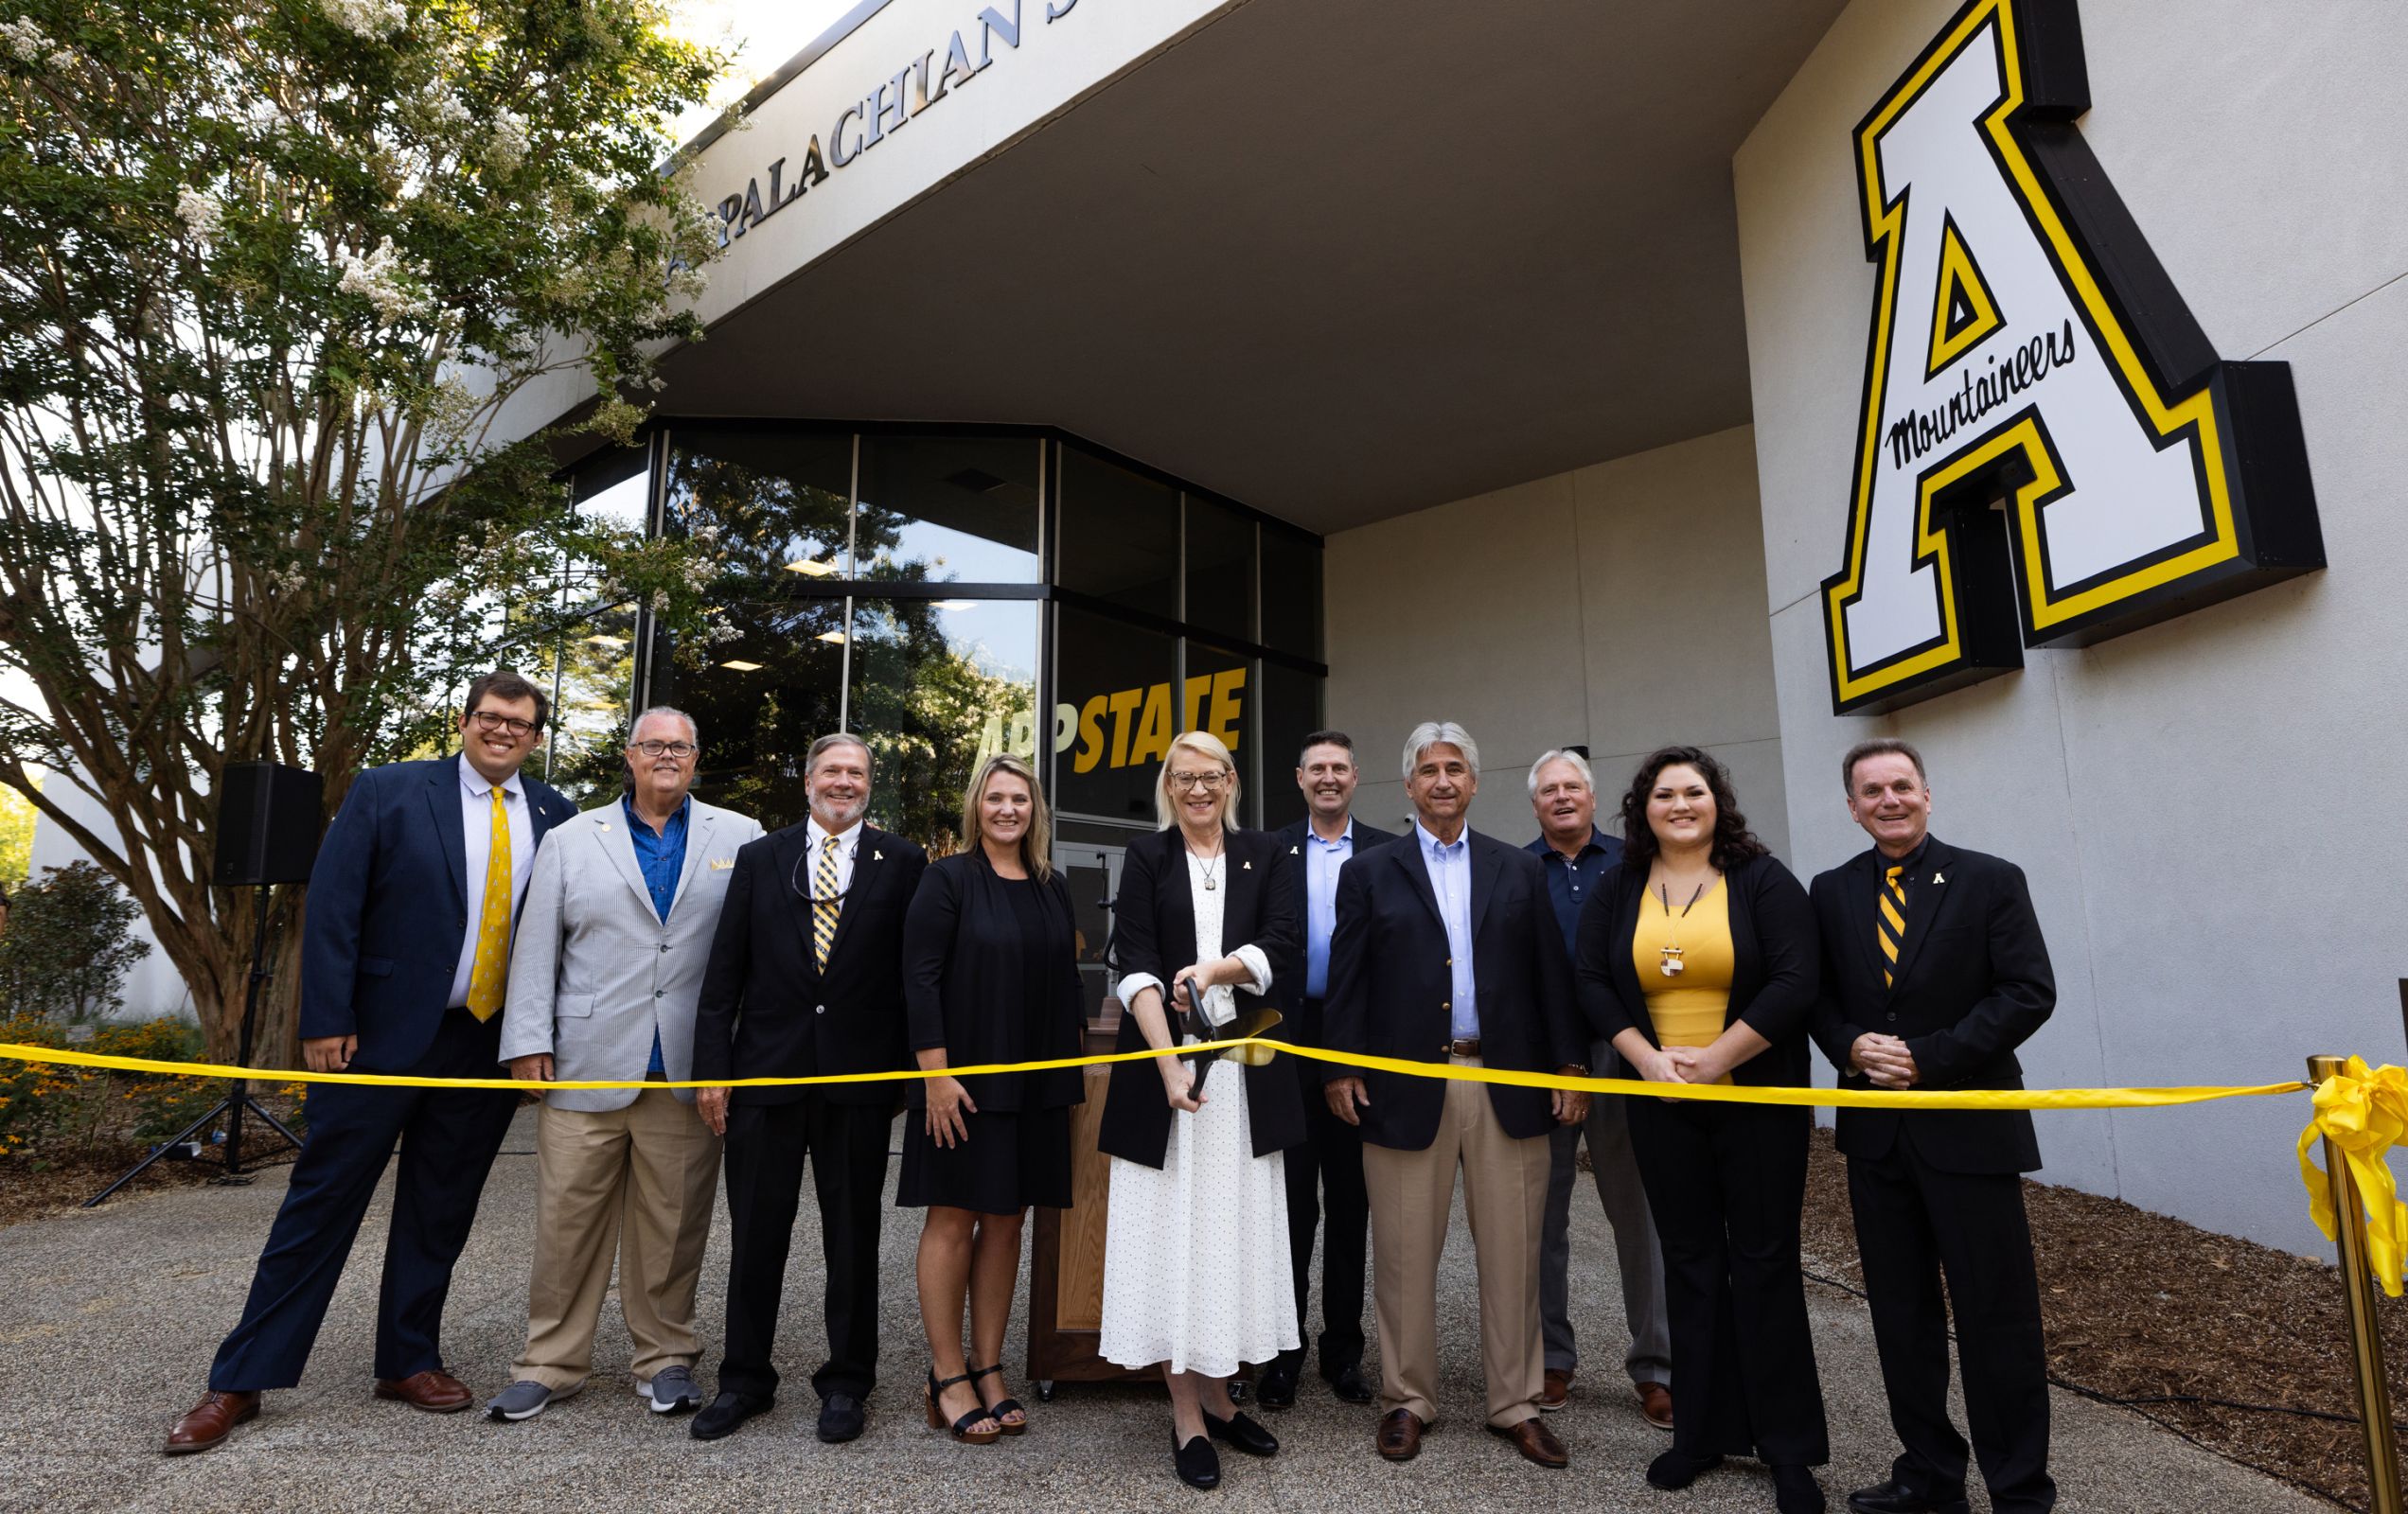 App. State opens Hickory campus, expanding educational access in Western North Carolina Photo